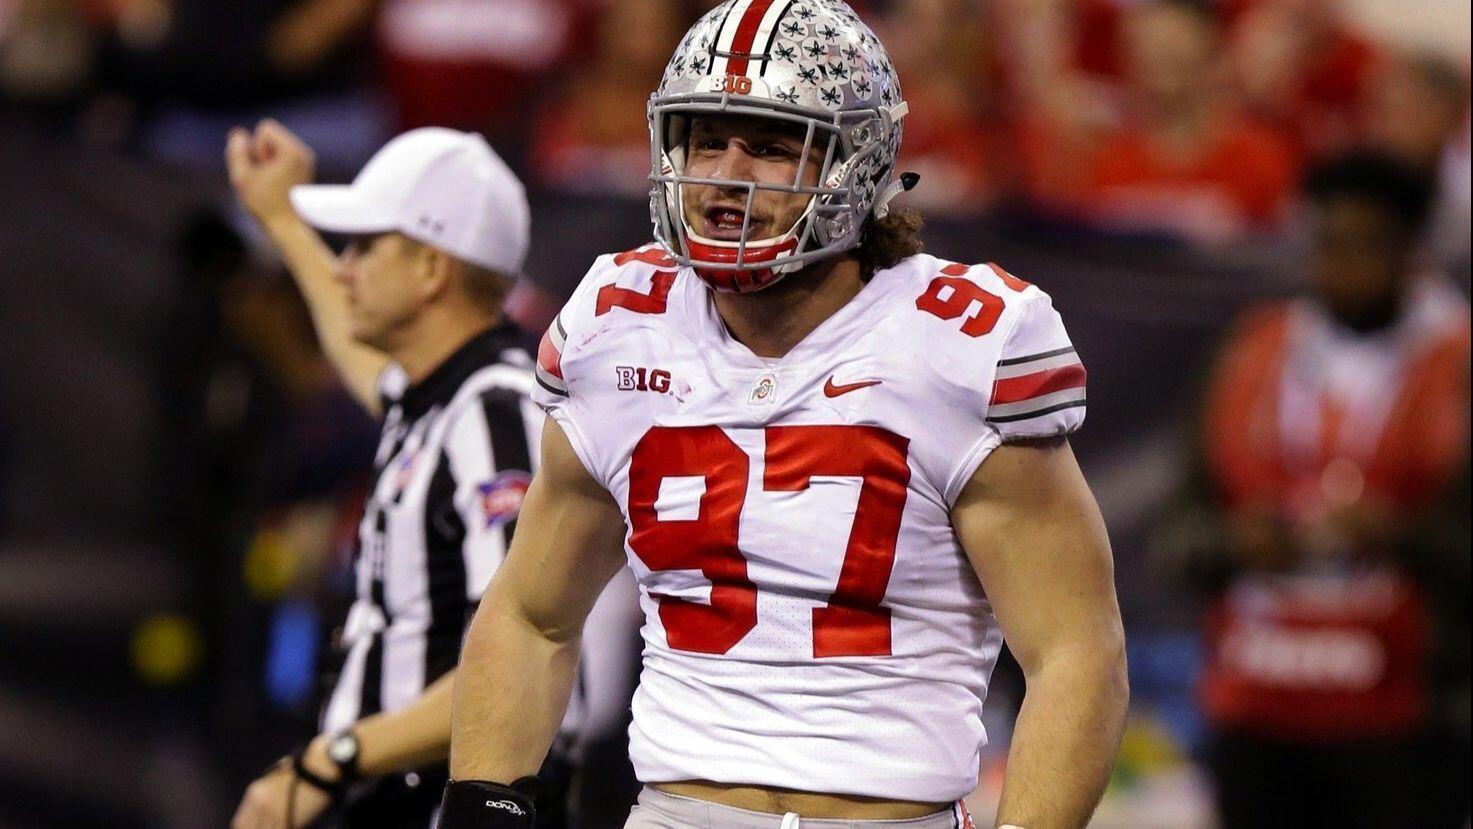 Joey Bosa touts brother as best NFL prospect in family - The San